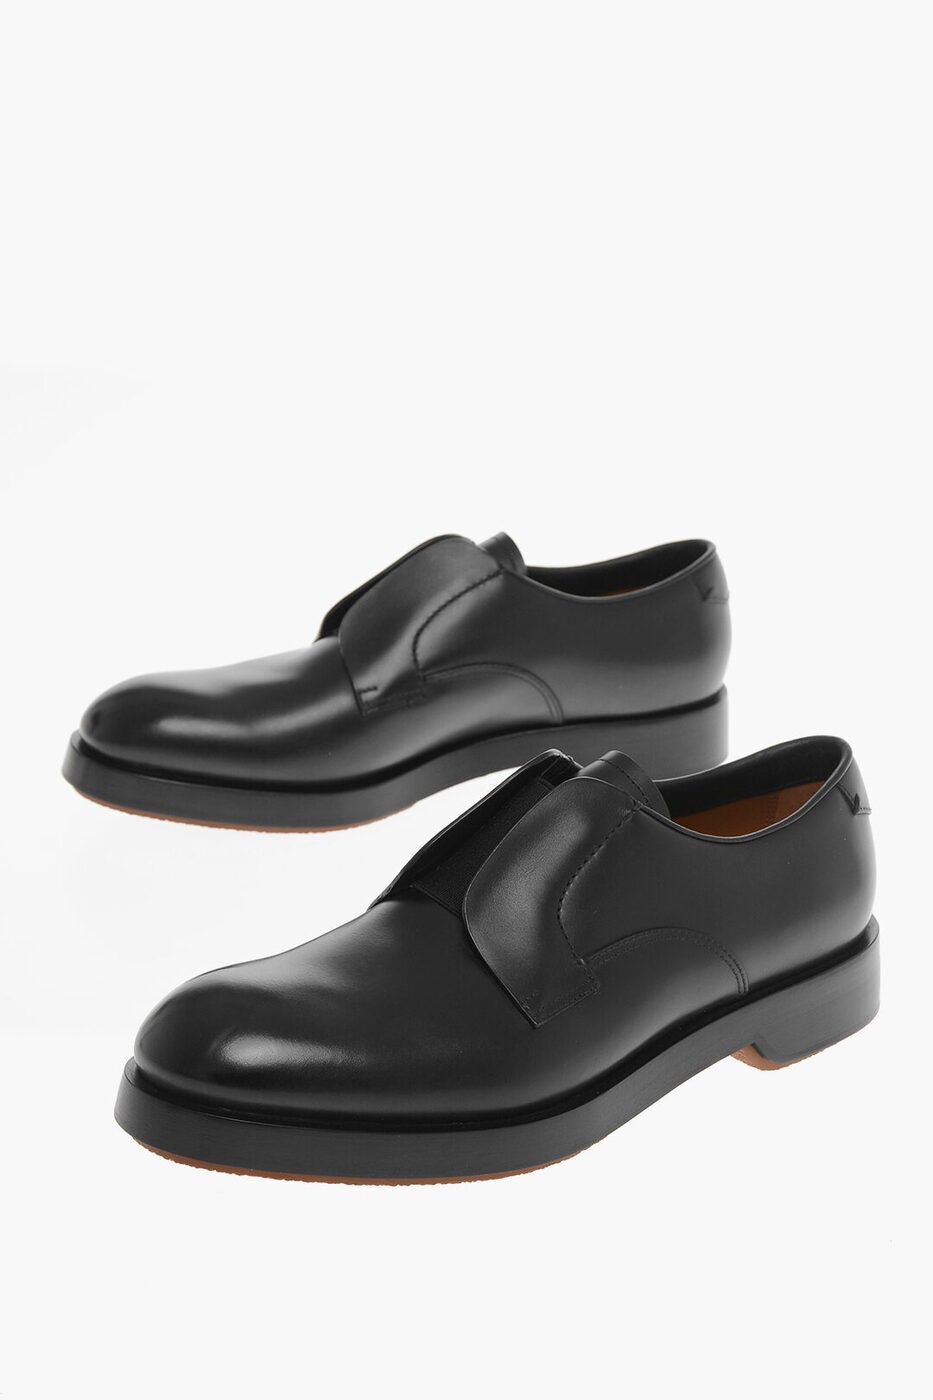 ZEGNA ゼニア ドレスシューズ A5209Z LHCLG NER メンズ ELASTIC INSERT UDINE LEATHER DERBY SHOES 【関税 送料無料】【ラッピング無料】 dk